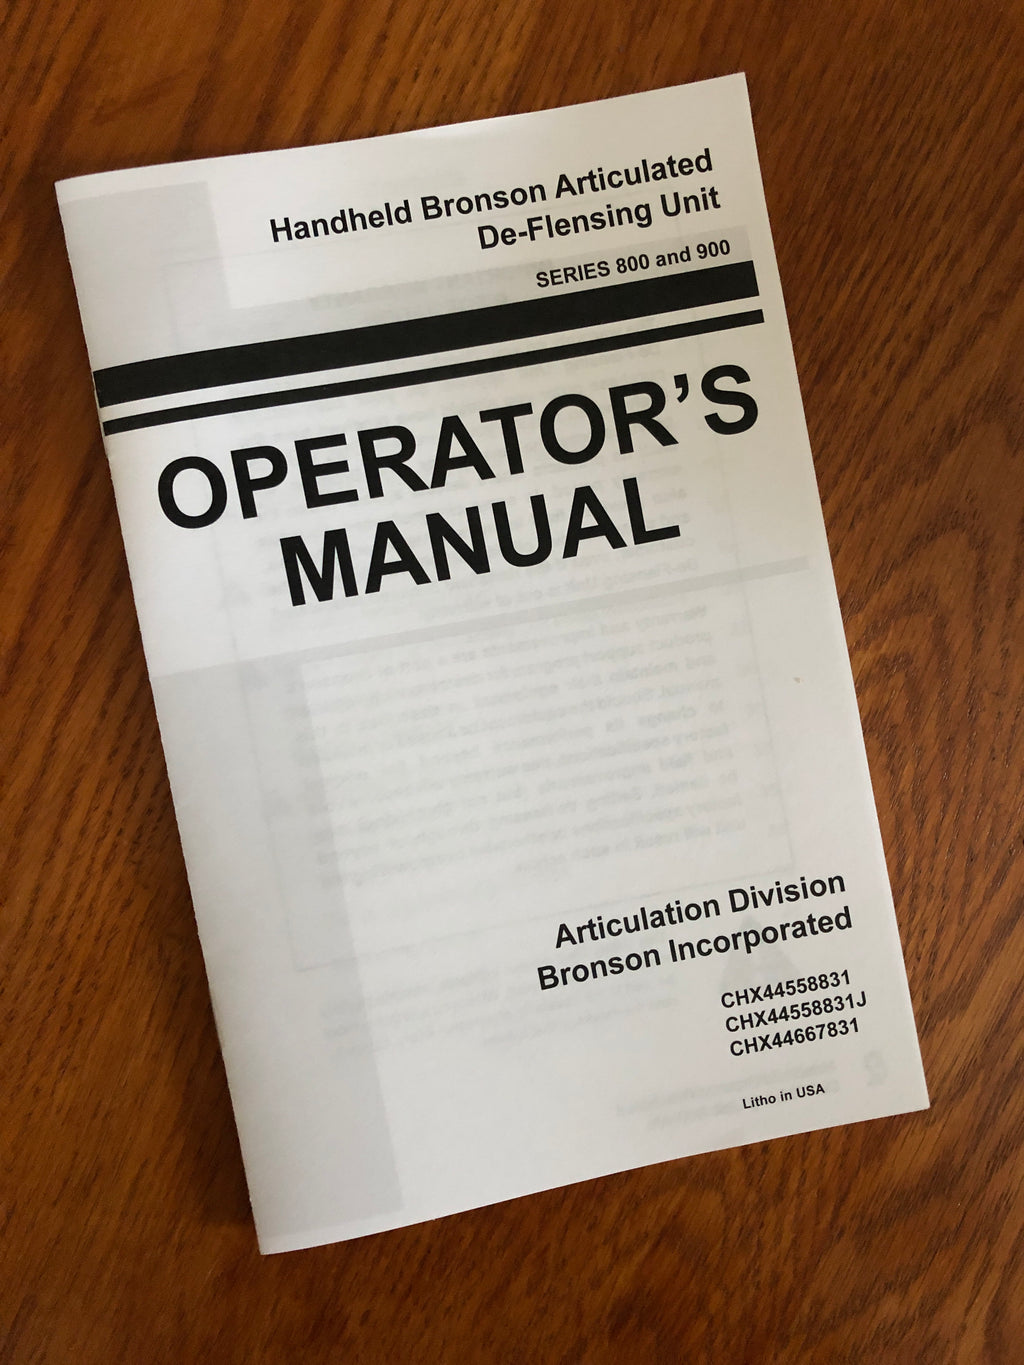 Operator's Manual for the Handheld Bronson Articulated De-Flensing Unit: A Game